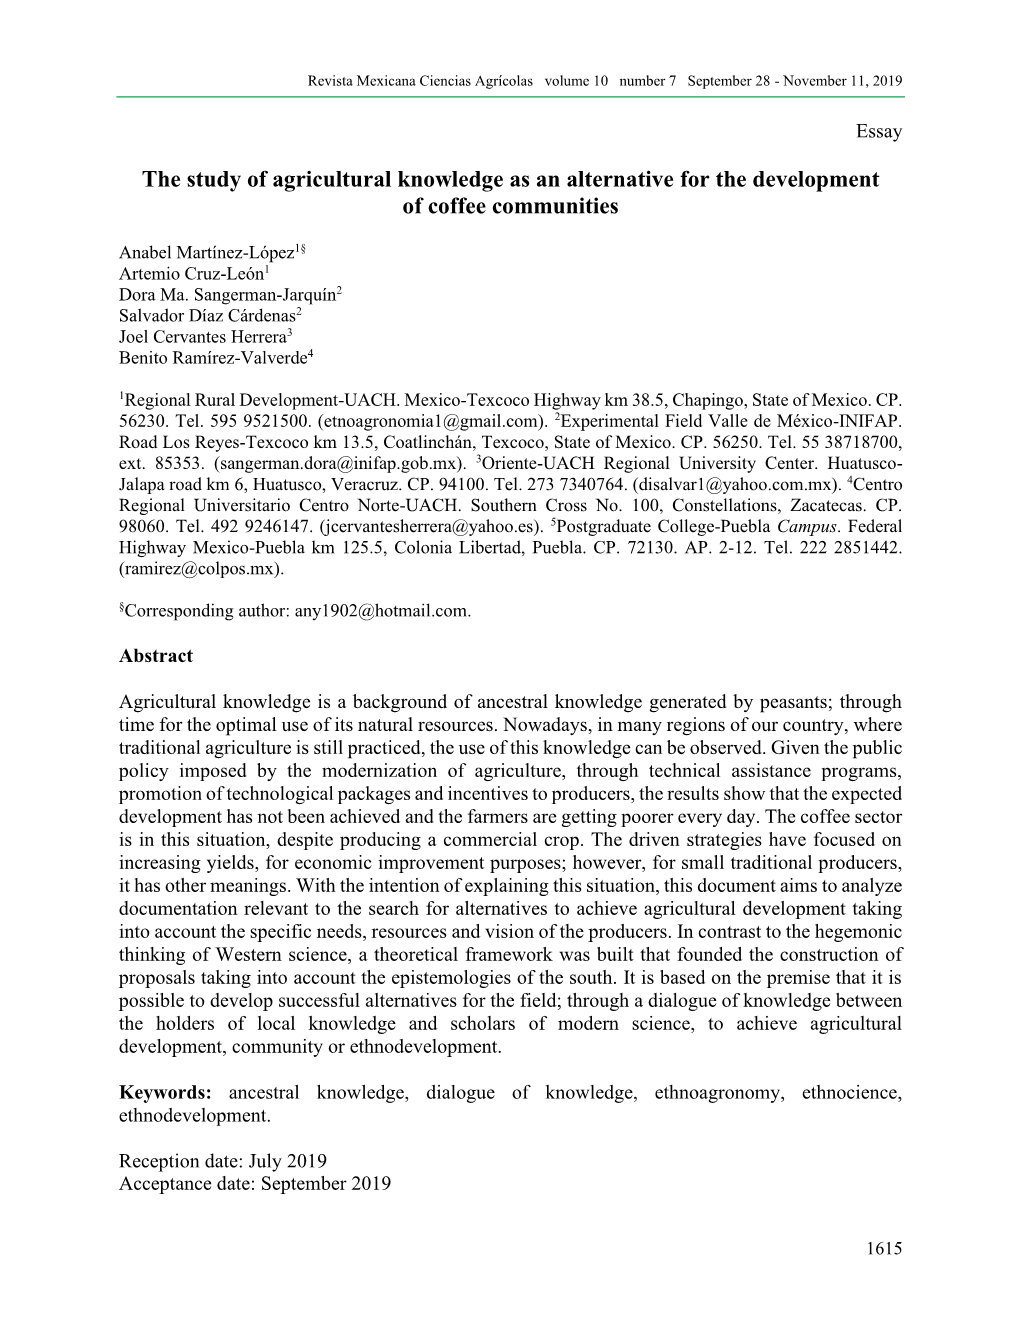 The Study of Agricultural Knowledge As an Alternative for the Development of Coffee Communities